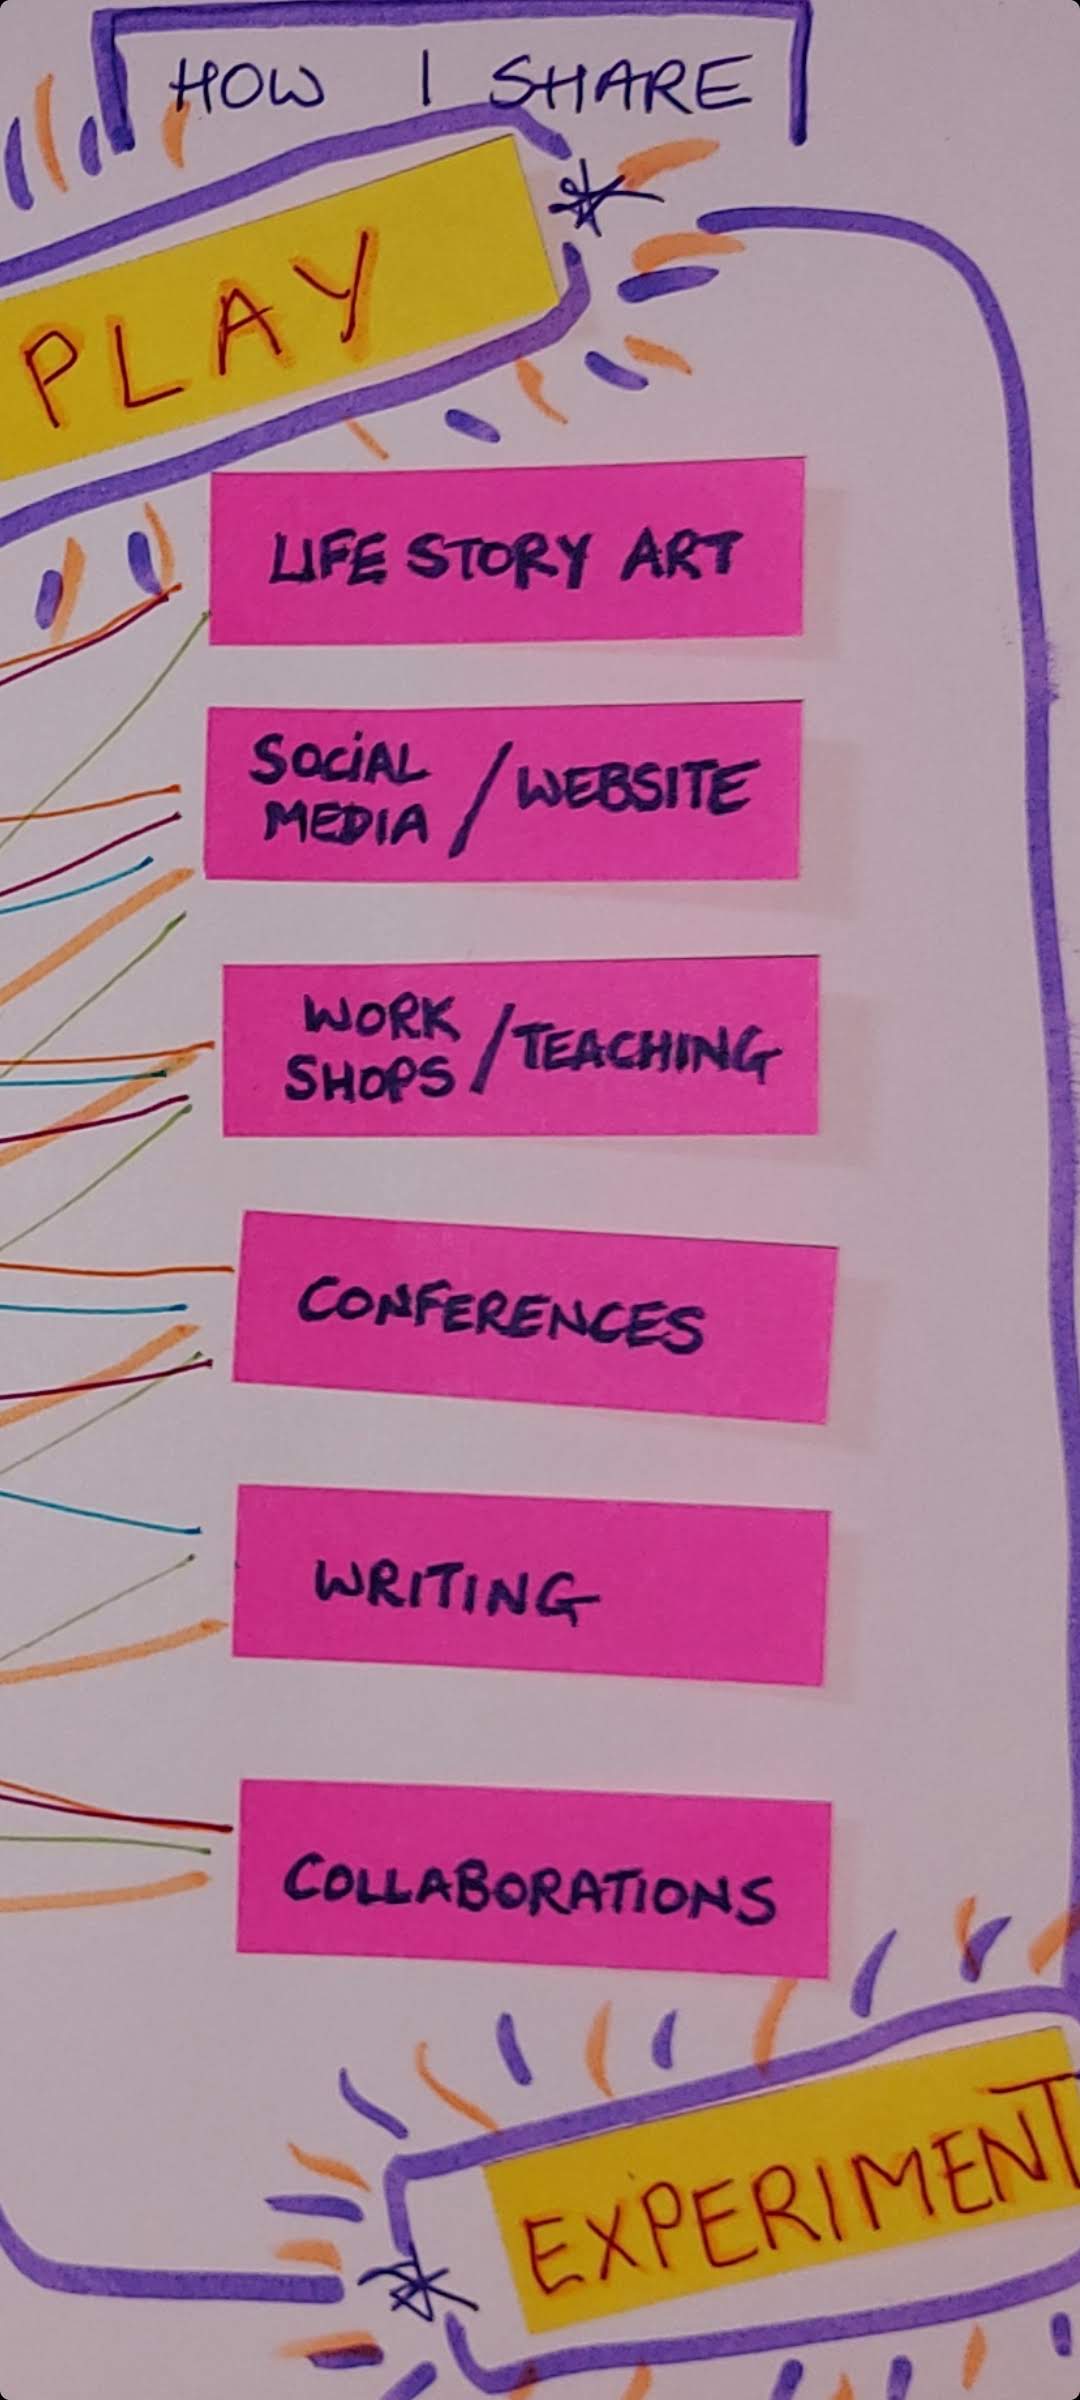 list of ways to share practice on pink post it notes showing: Life Story Art, Social media/Website, Workshops/Teaching, Conferences, Writing and Collaborations